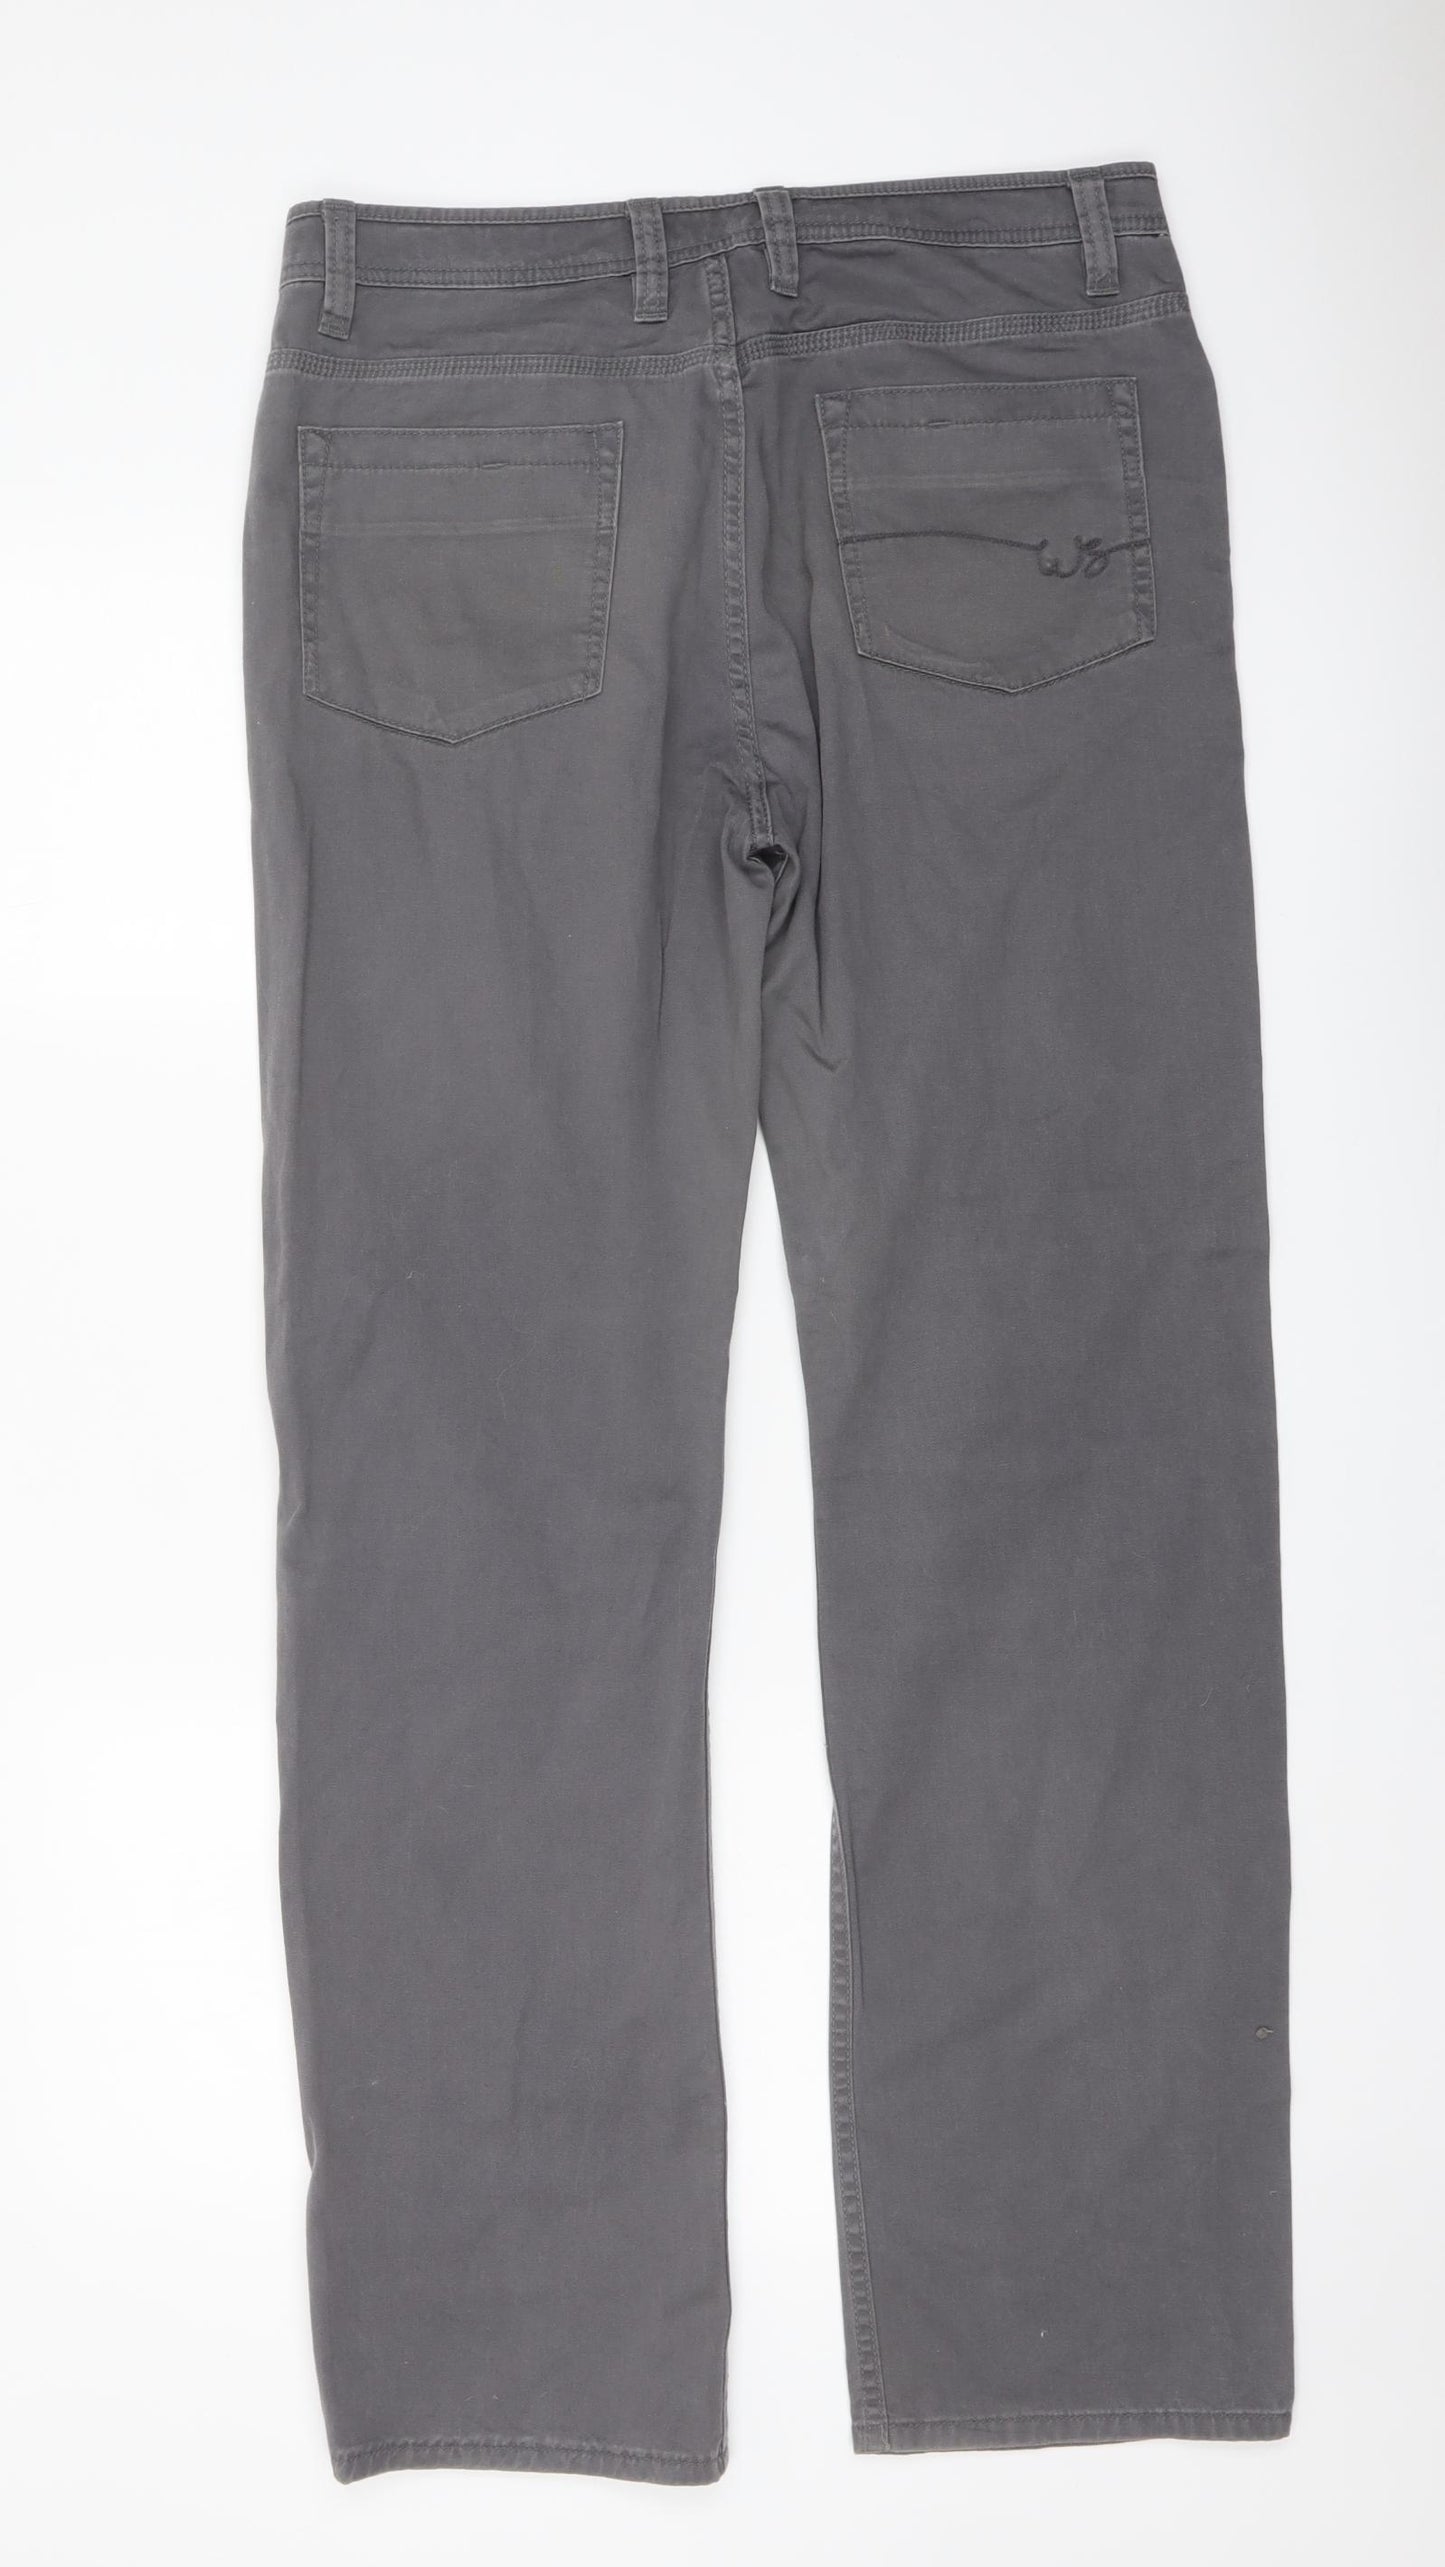 White Stuff Mens Grey Cotton Straight Jeans Size 32 in L31 in Regular Button - Embroidered Detail